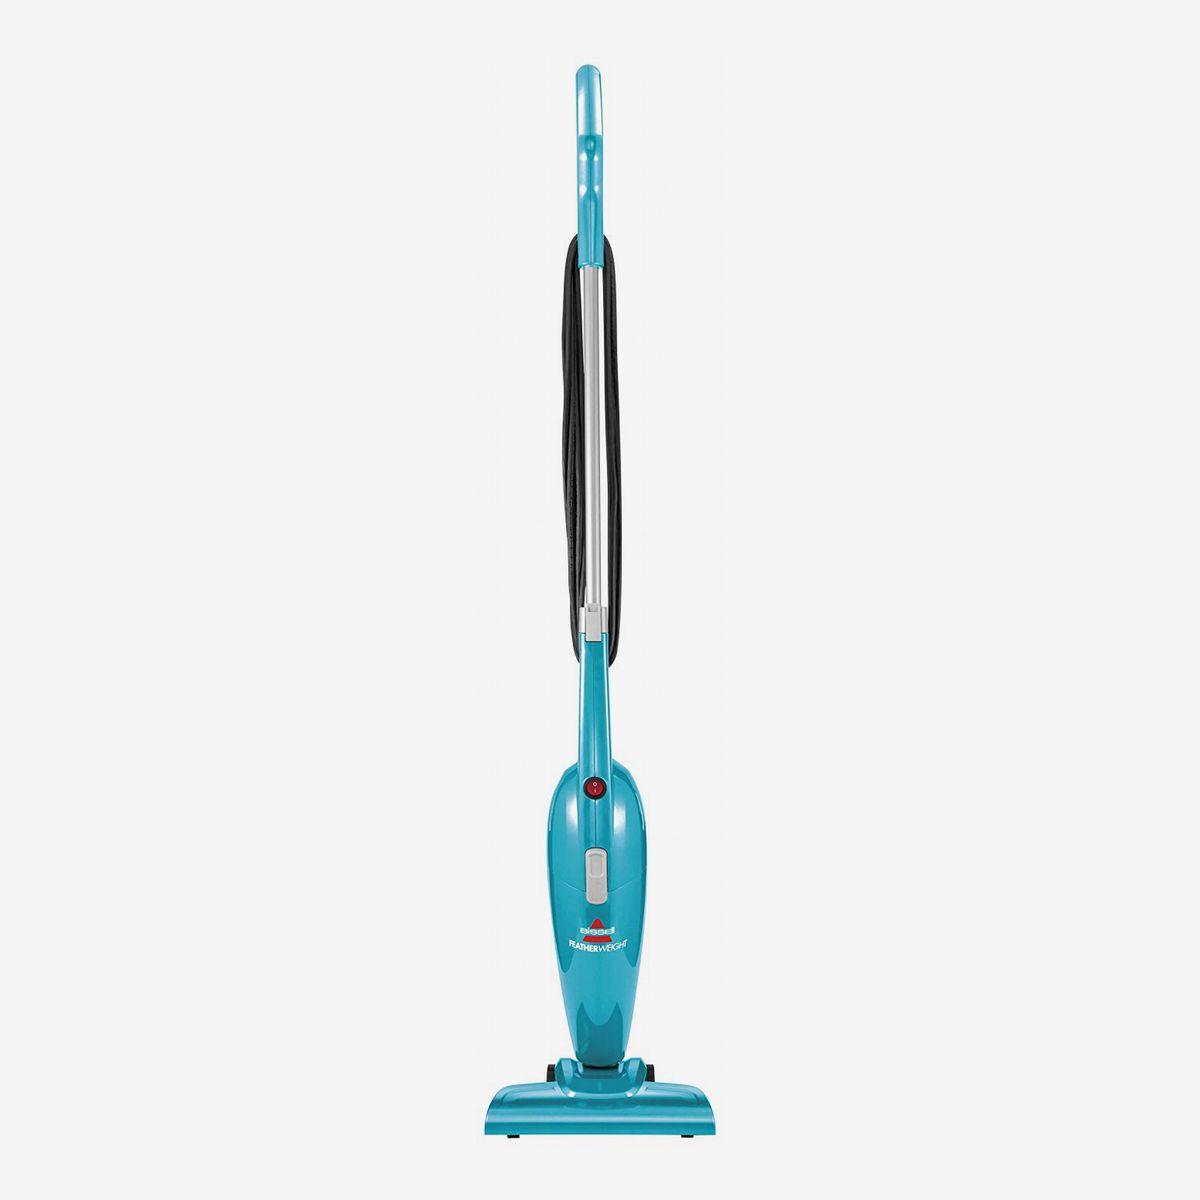 18 Best Vacuum Cleaners 2021 The, Best Inexpensive Vacuum For Hardwood Floors And Carpet